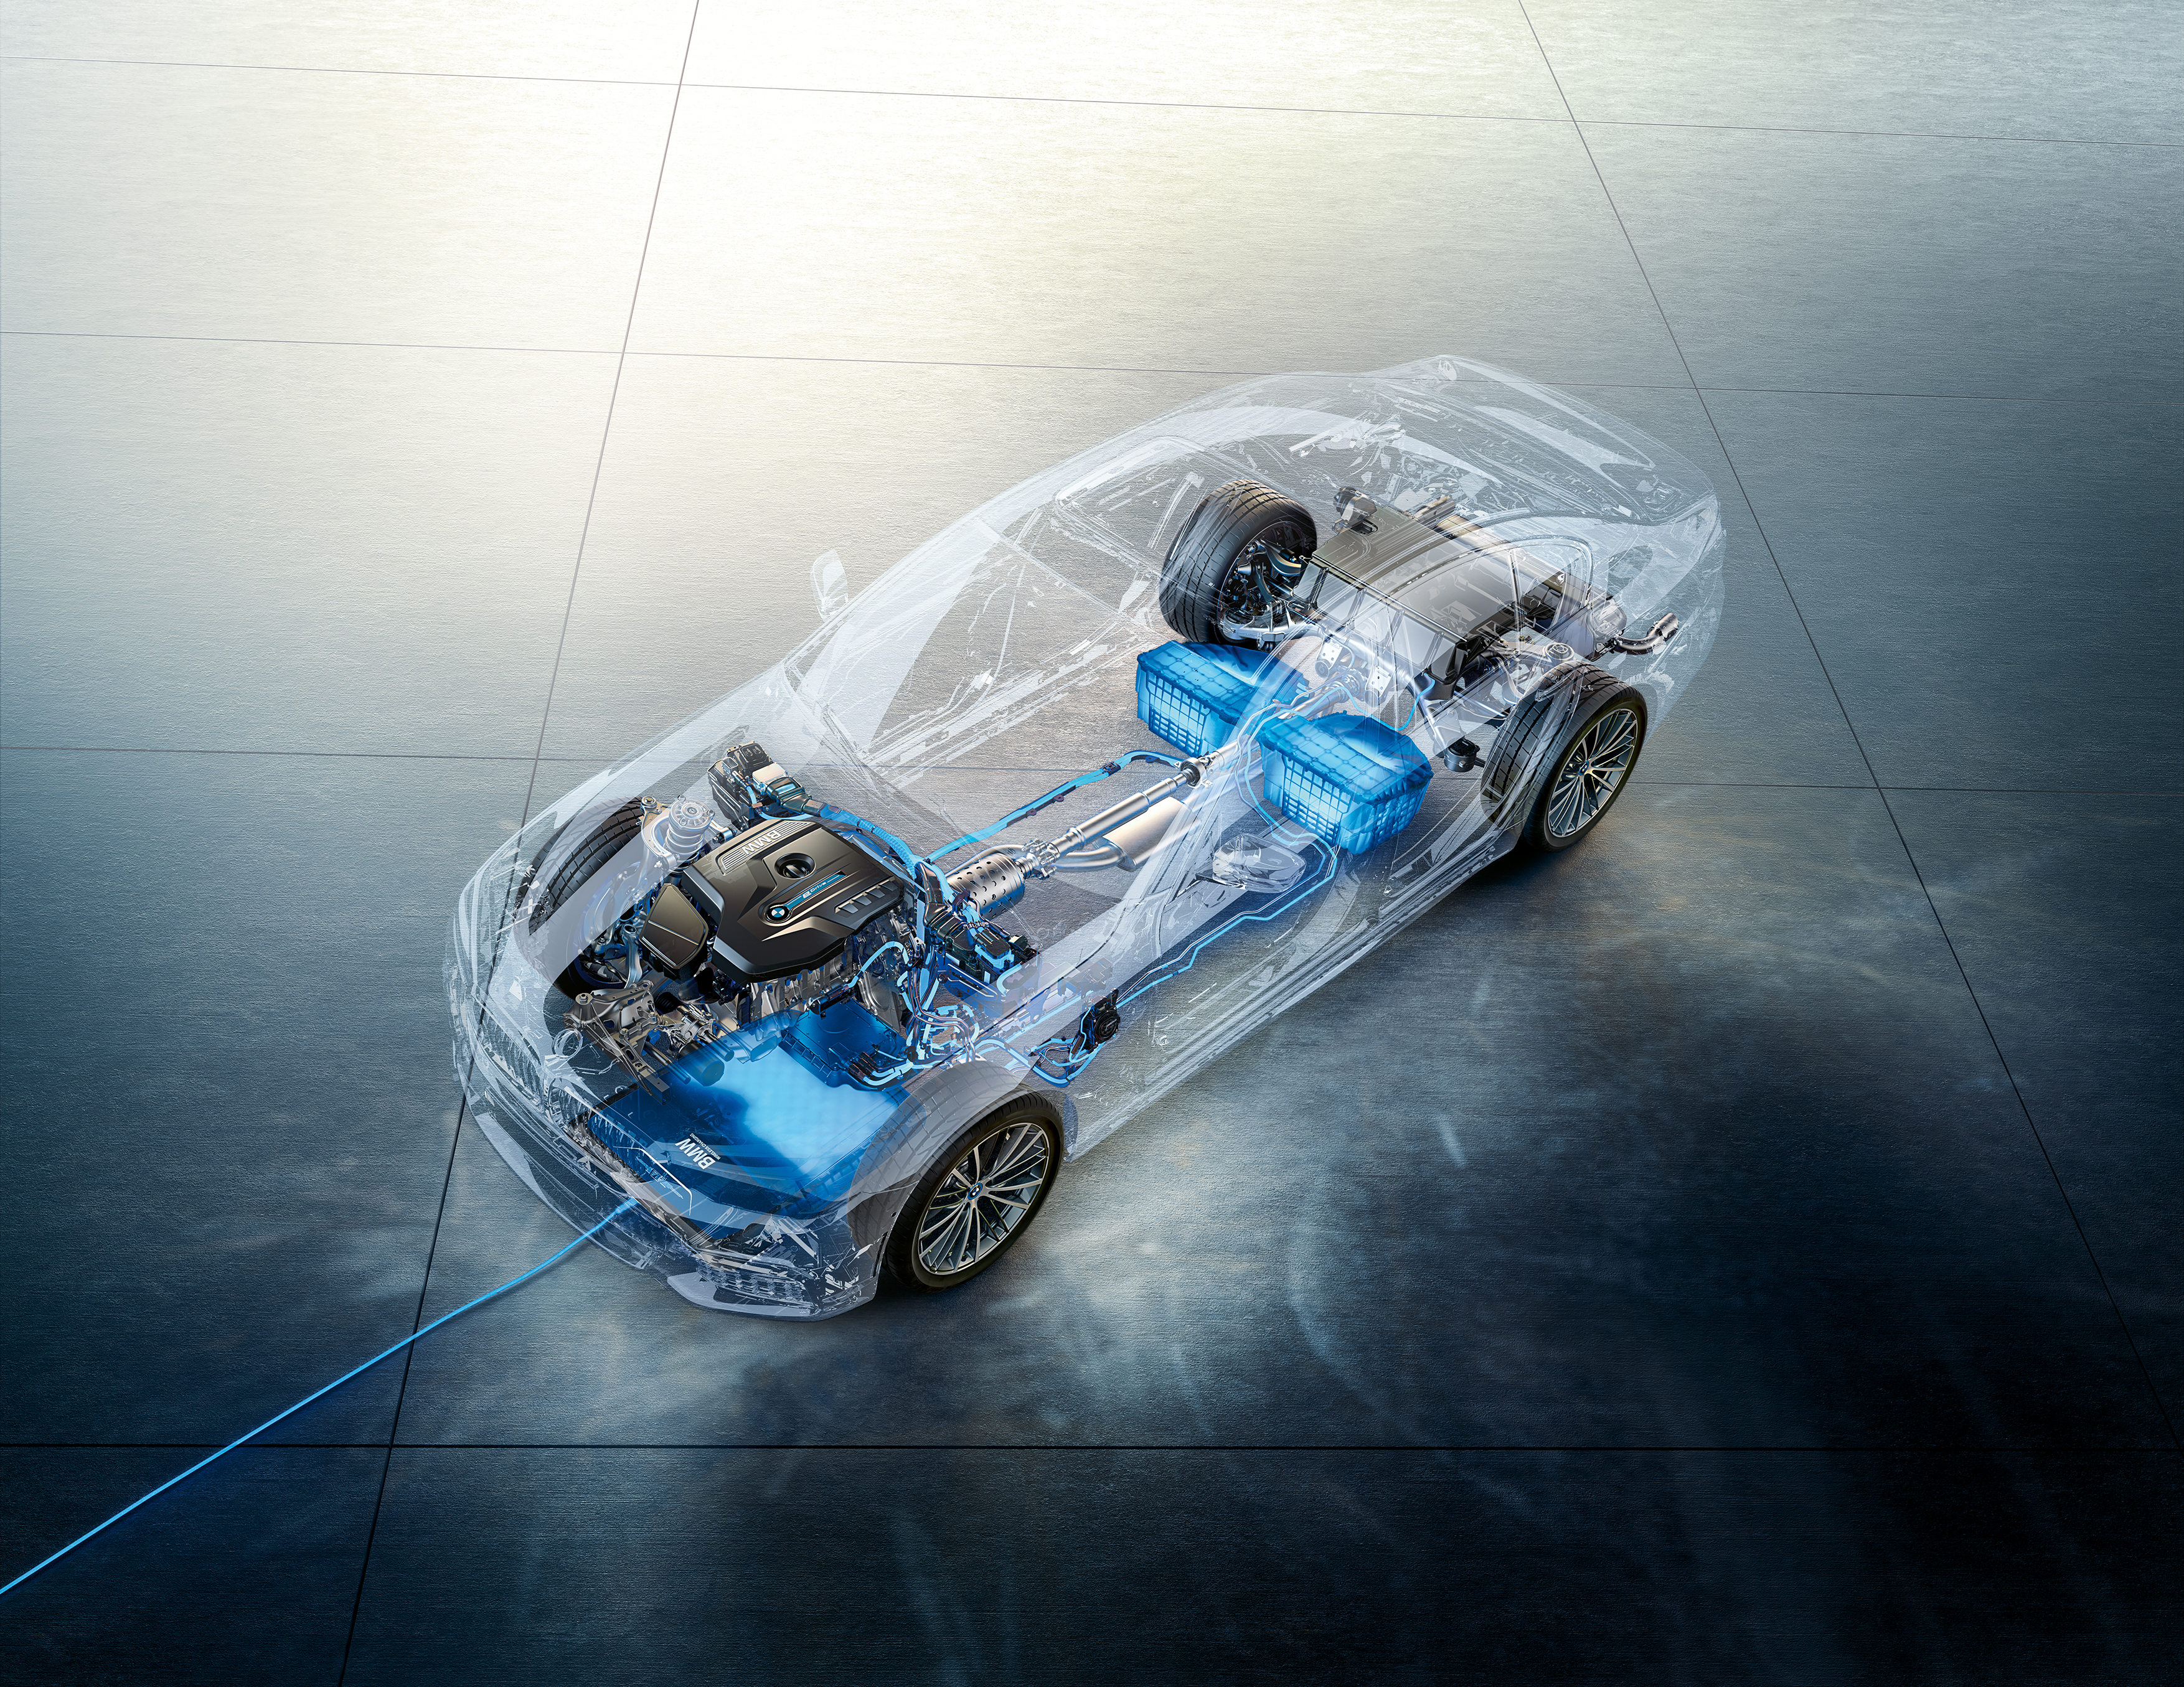 BMW’s Inductive Charging Pilot Program Receives Honors From Green Car Journal